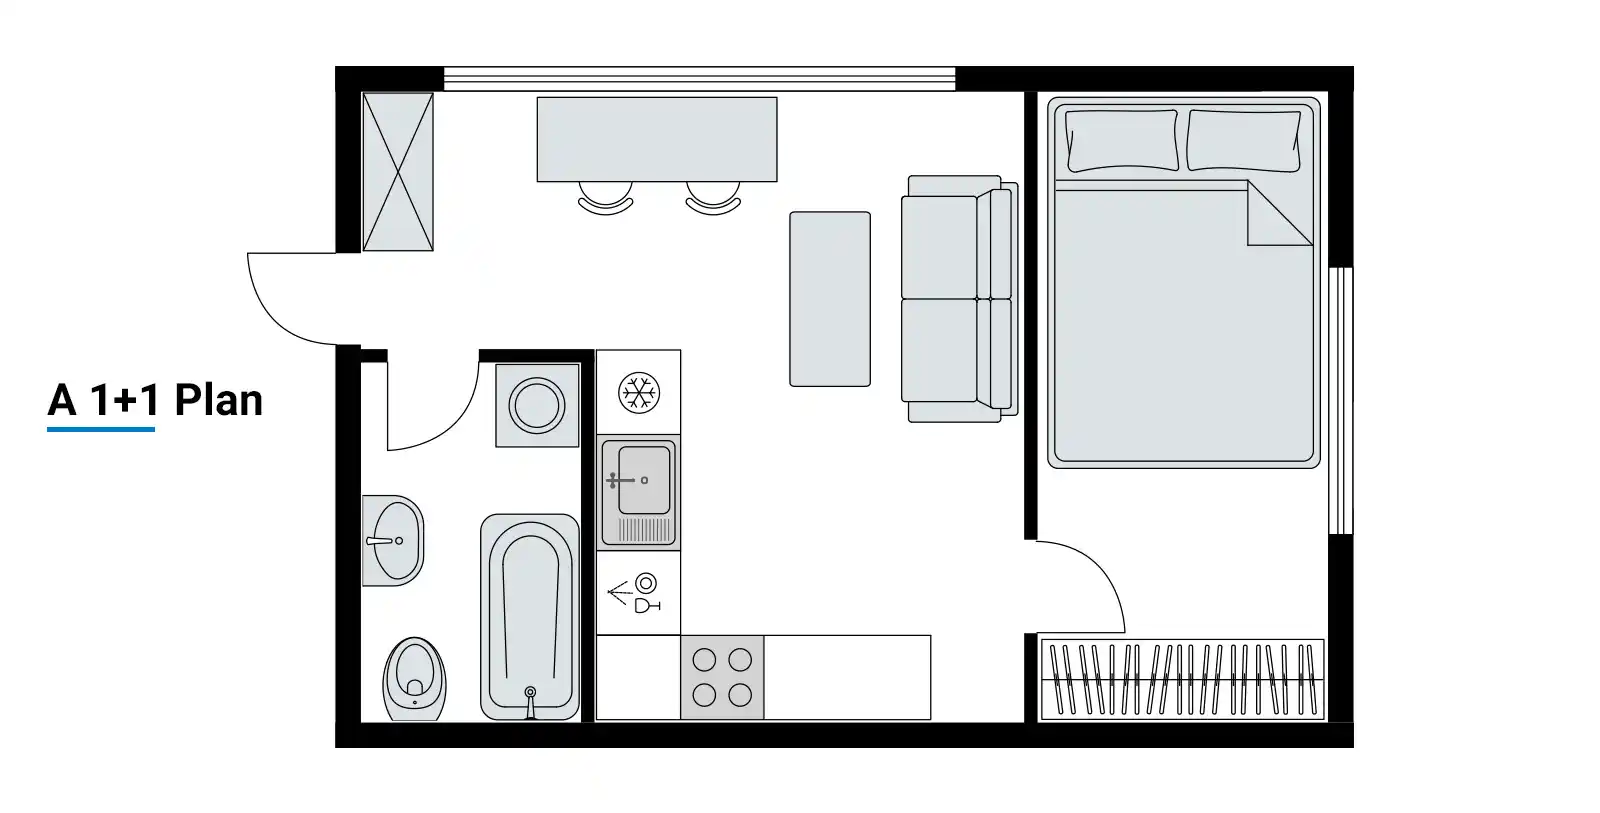 What is 1+1 apartment in turkey? A plan of 1+1 flat in Turkey with 1 bedroom and 1 hall